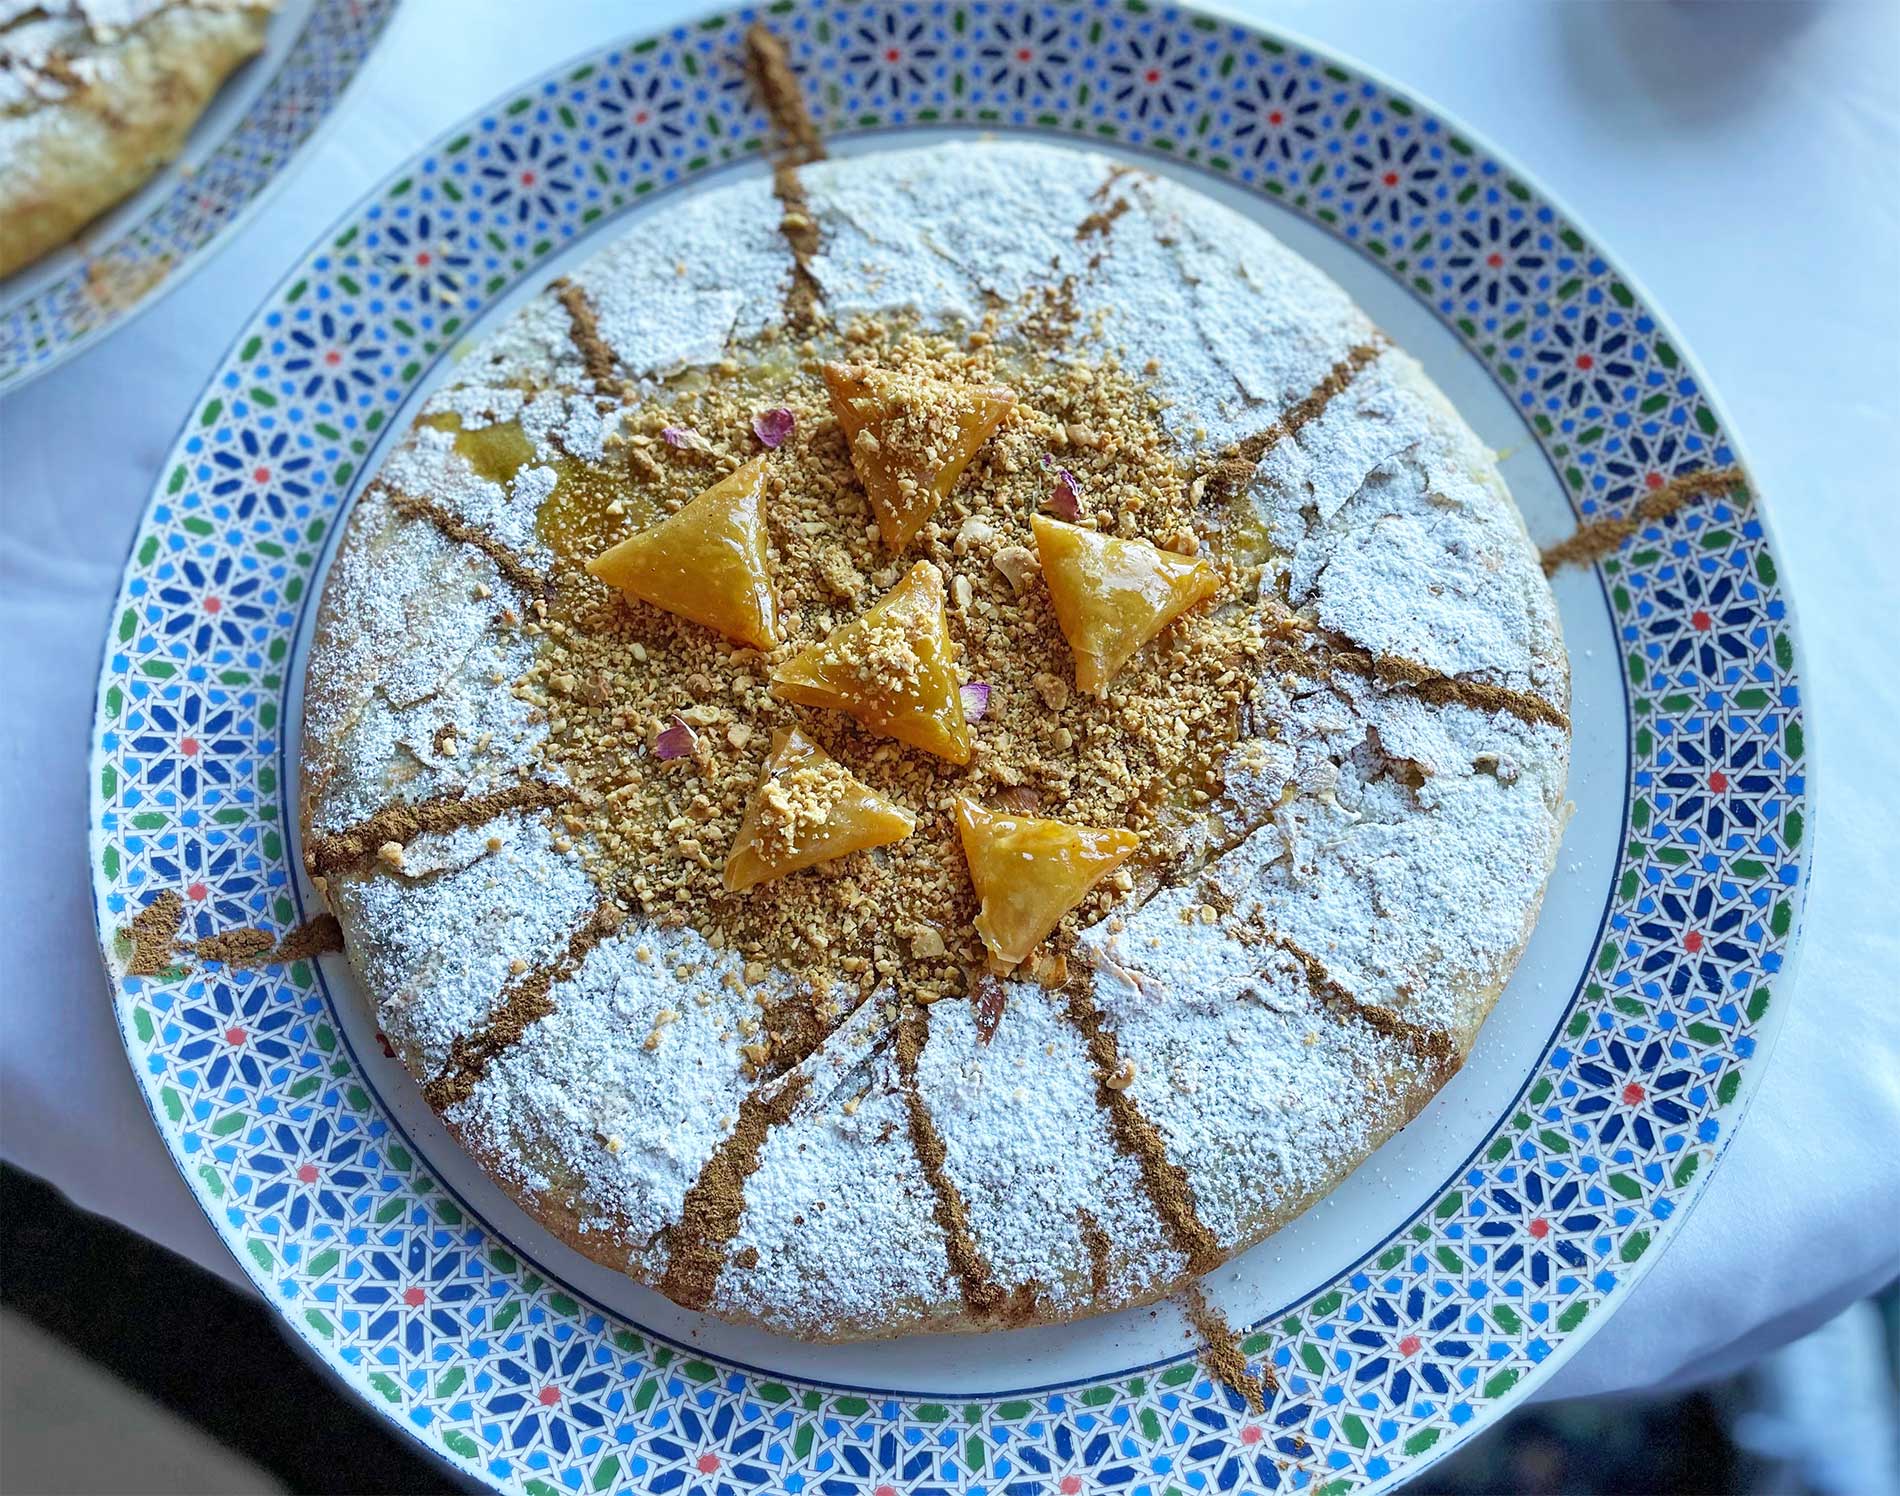 Pastilla is one of the iconic Moroccan dishes | by Paladar y Tomar for CÚRATE Trips